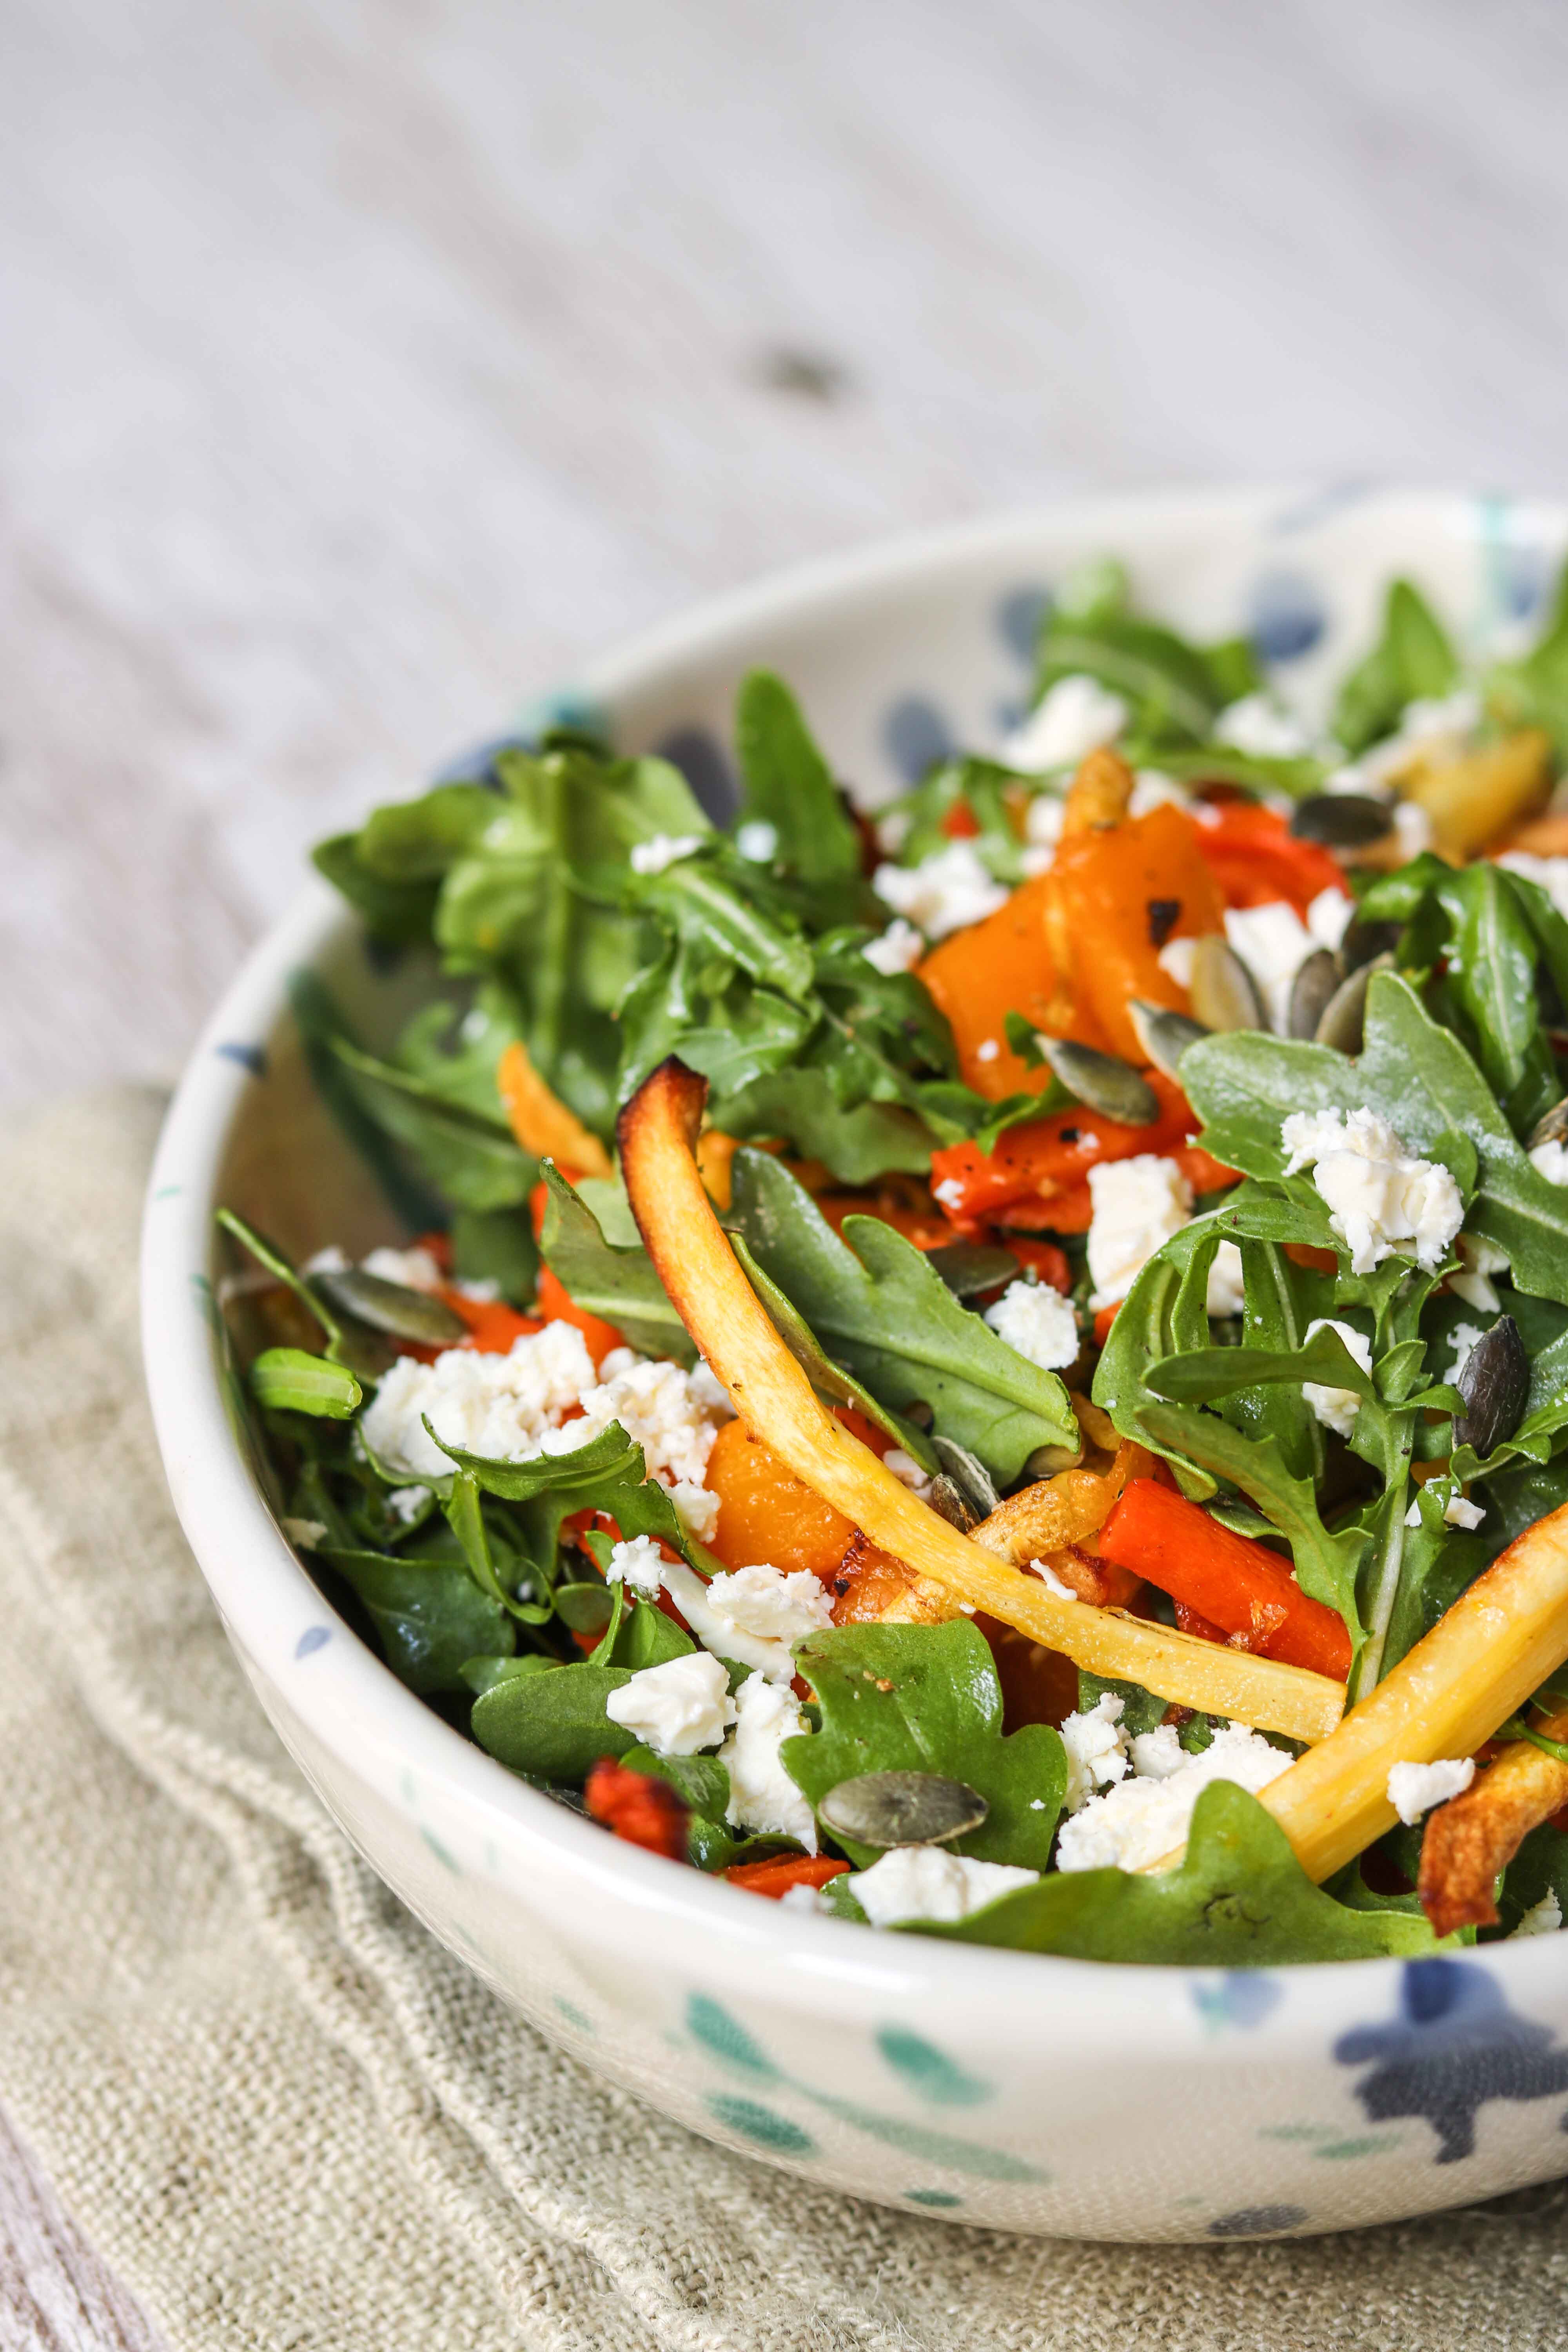 Roasted Vegetable Salad, a quick, healthy and tasty alternative to a shop bought sandwich.